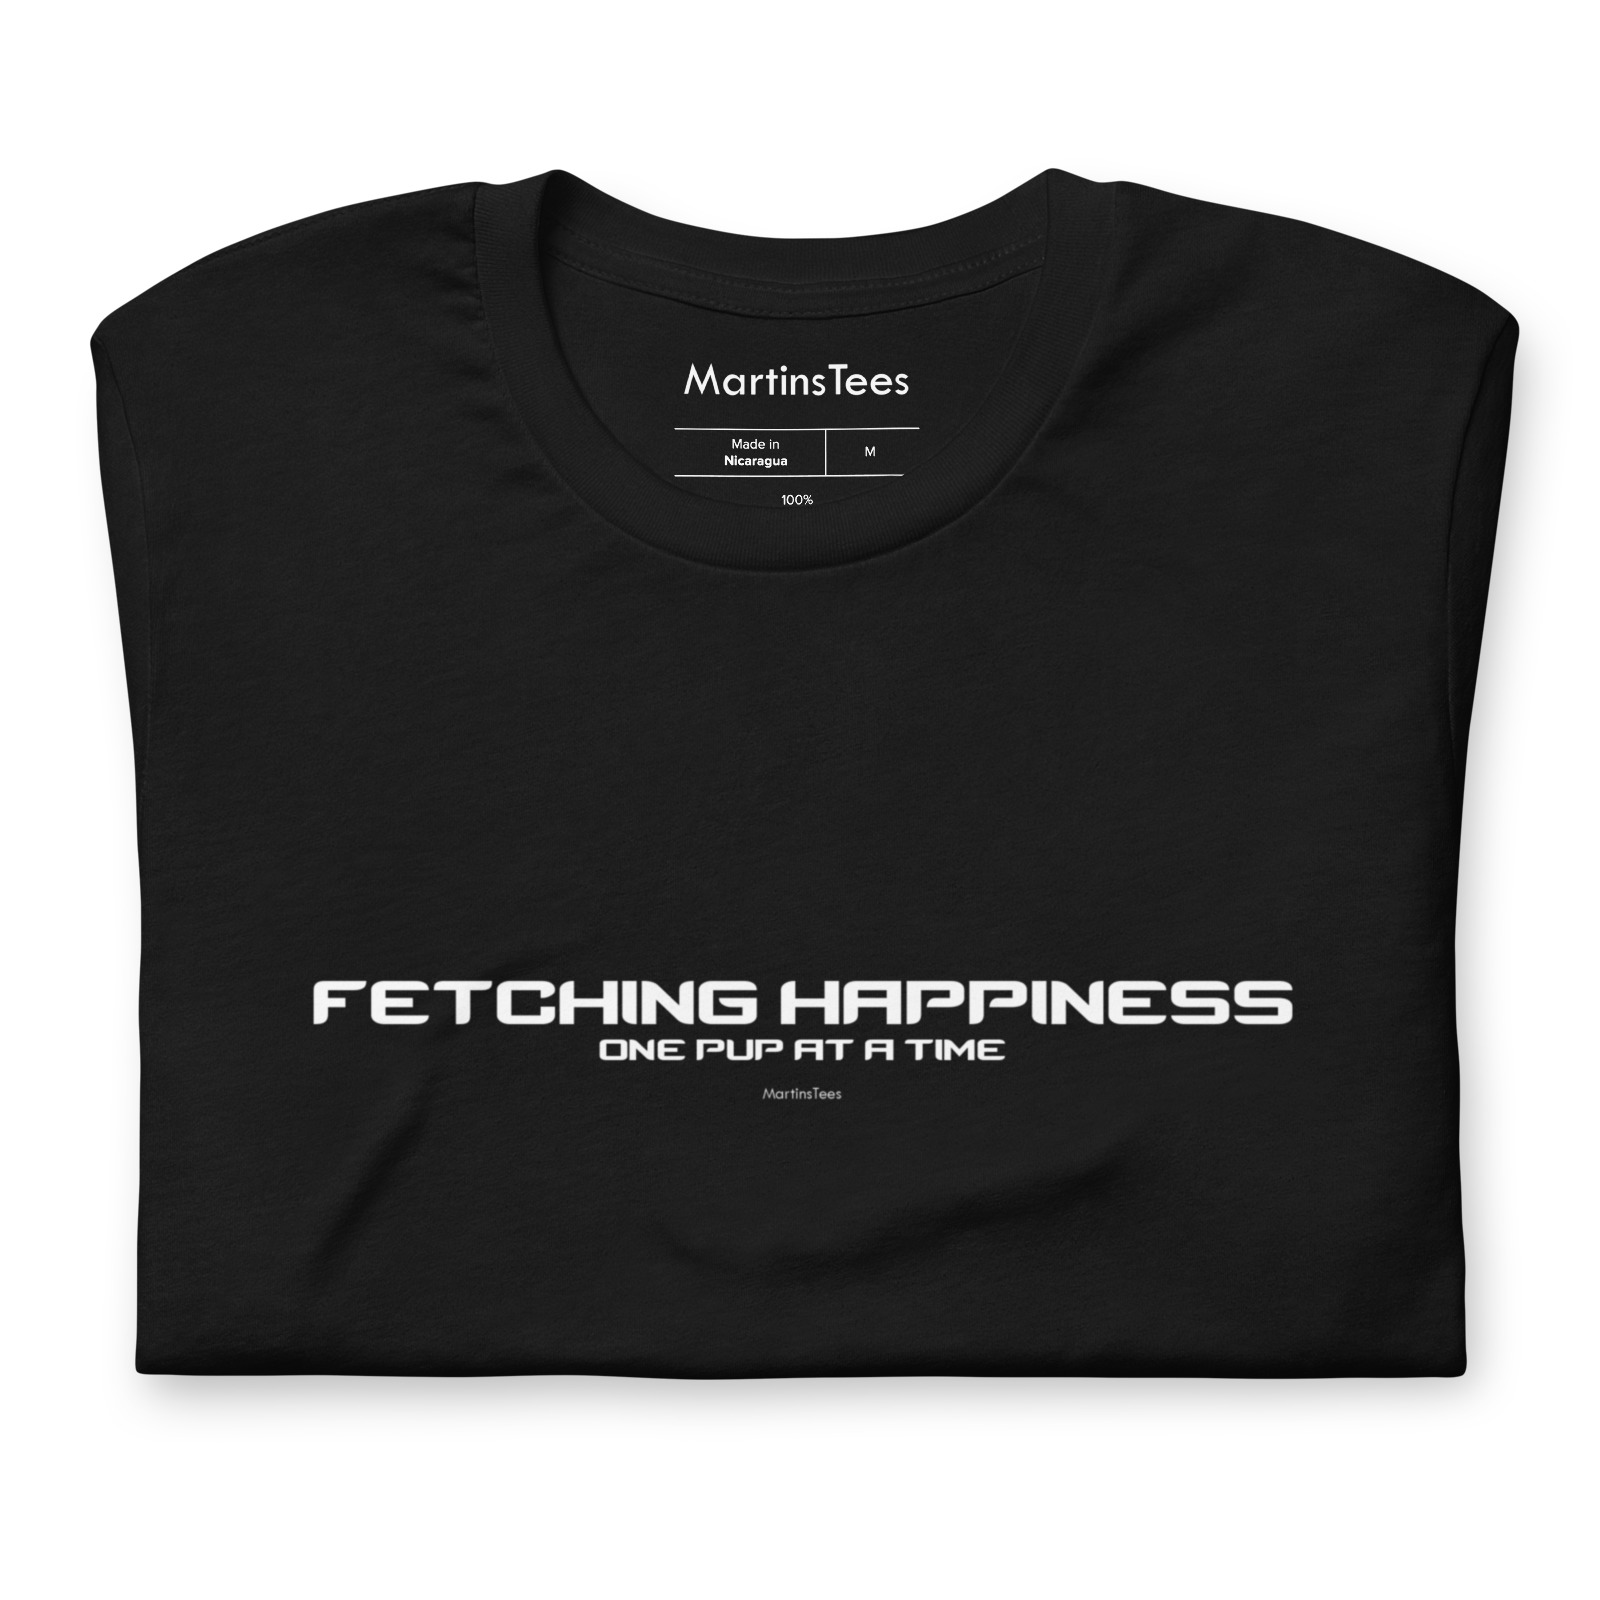 T-shirt: FETCHING HAPPINESS - ONE PUP AT A TIME